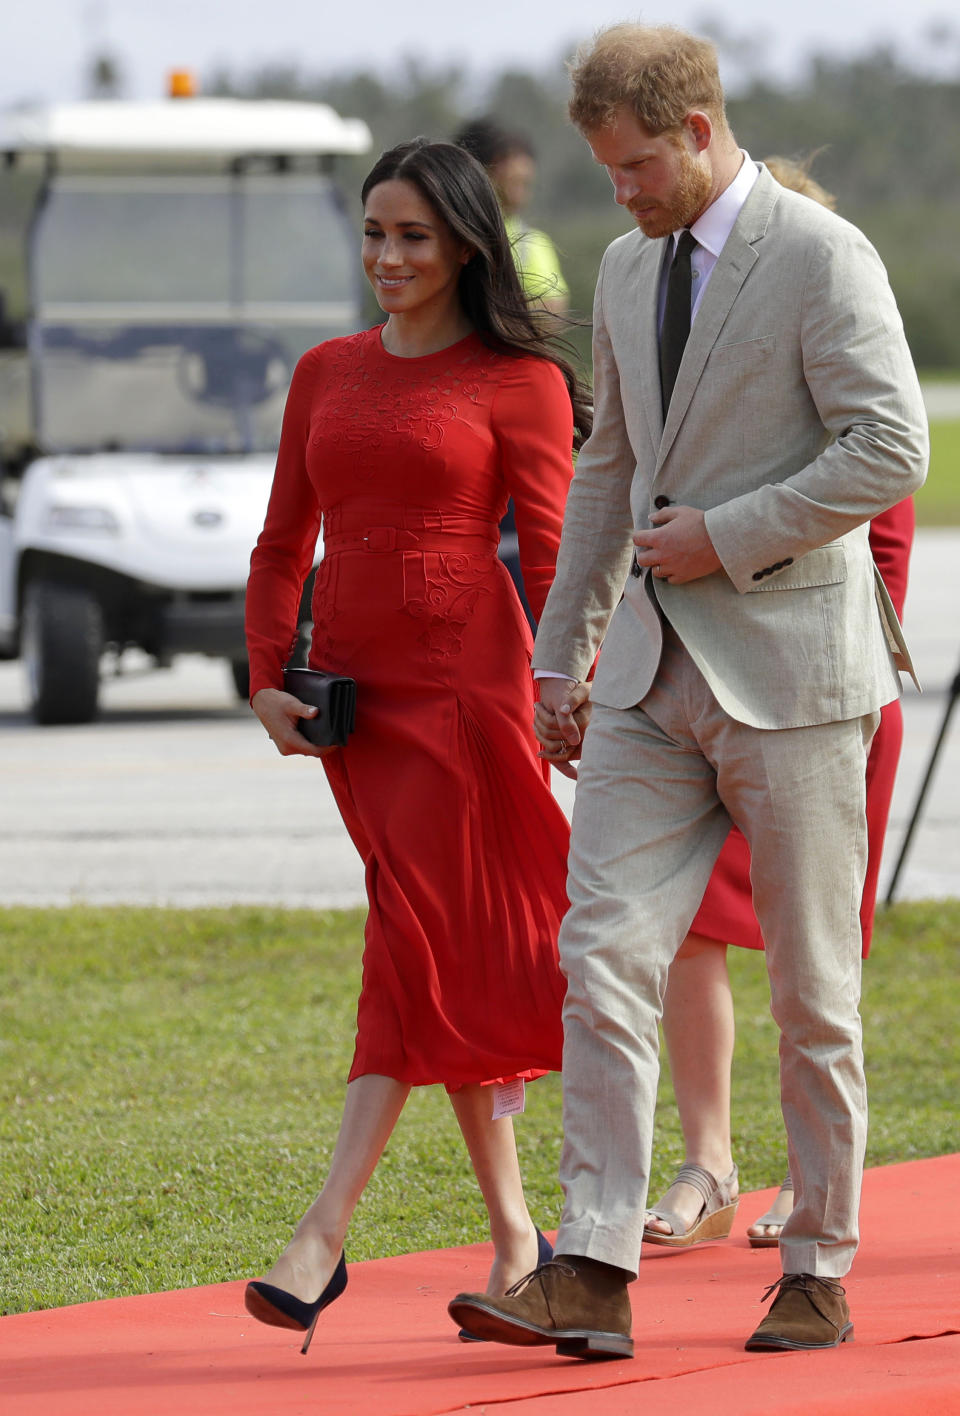 Britain's Prince Harry and Meghan, Duchess of Sussex arrive in Nuku'alofa,Tonga, Thursday, Oct. 25, 2018. Prince Harry and his wife Meghan are on day 10 of their 16-day tour of Australia and the South Pacific. (AP Photo/Kirsty Wigglesworth)